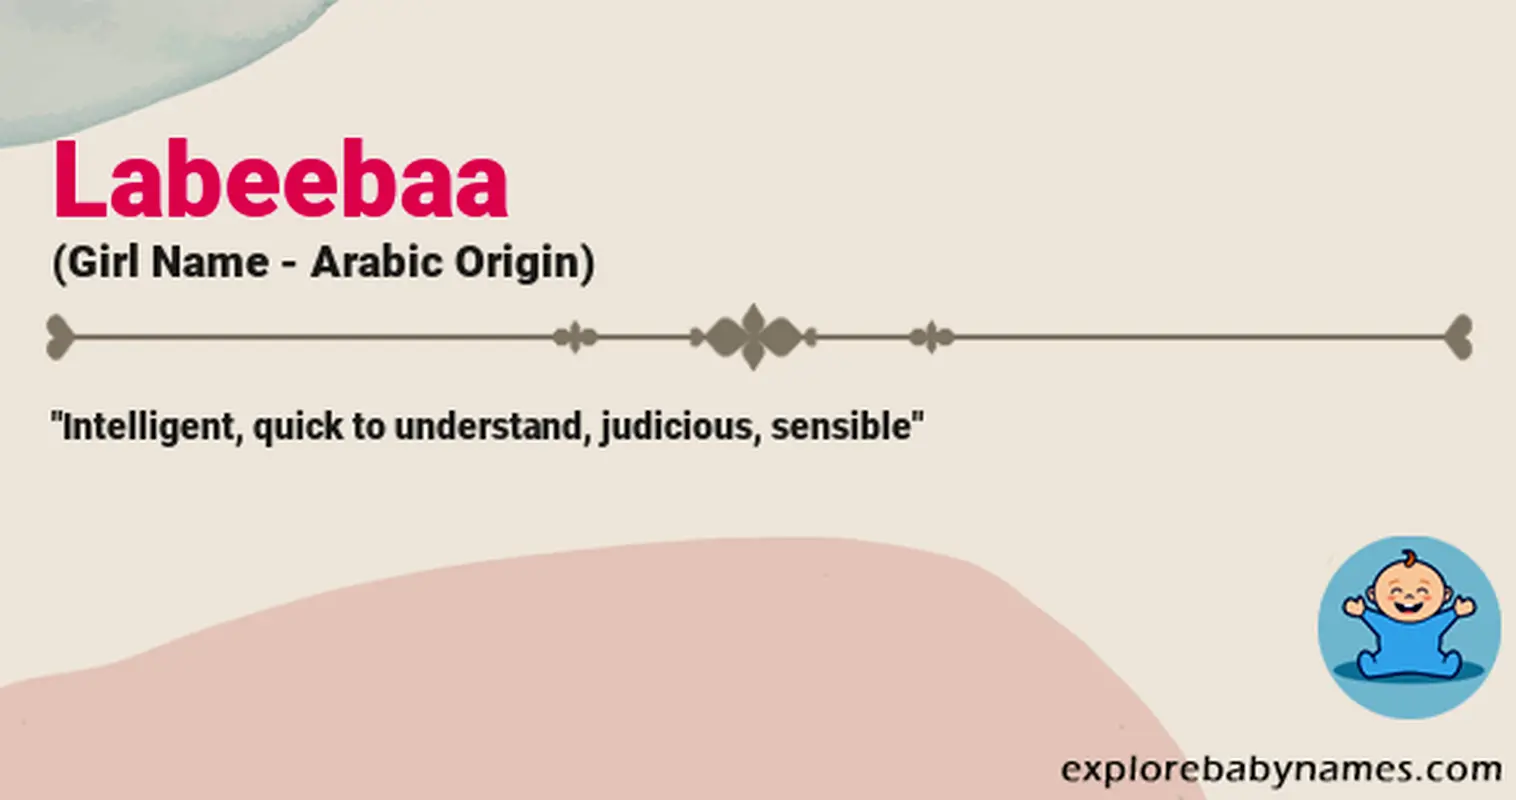 Meaning of Labeebaa